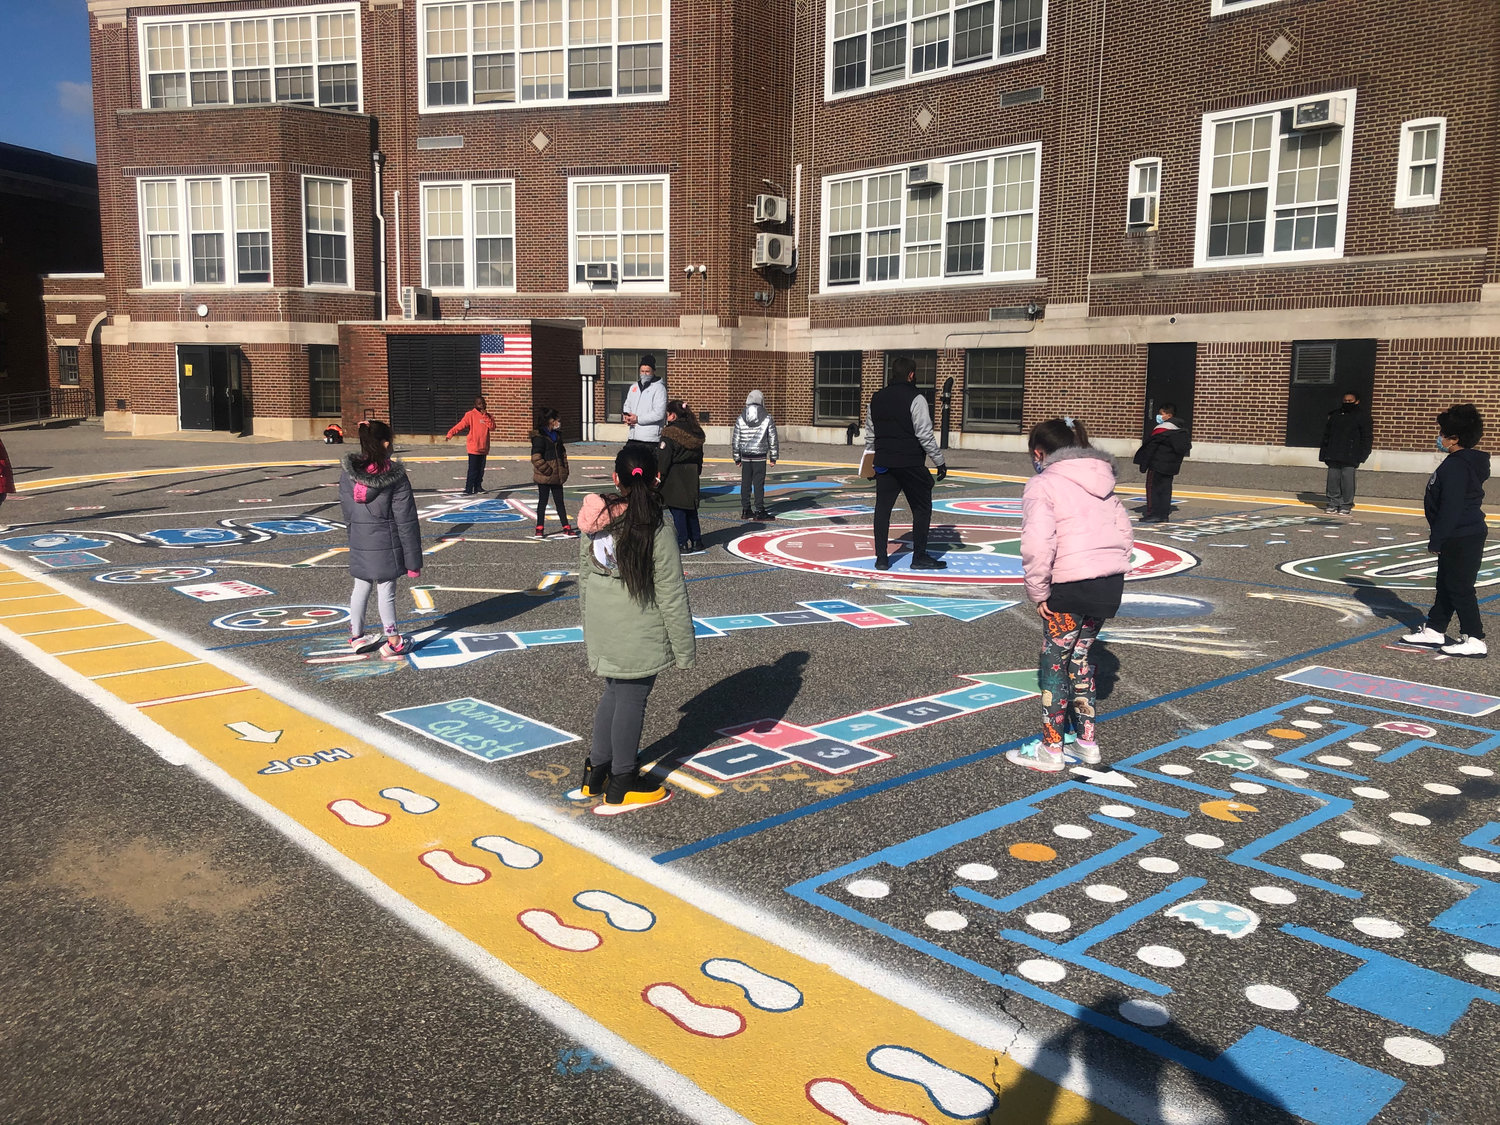 Thinking outside the blacktop box: Steele Elementary School students took part in a variety of fitness exercises after physical education teachers Joseph Billi and Richard Garguilo created a blacktop activity wheel in the schoolyard using paint and cardboard box stencils.